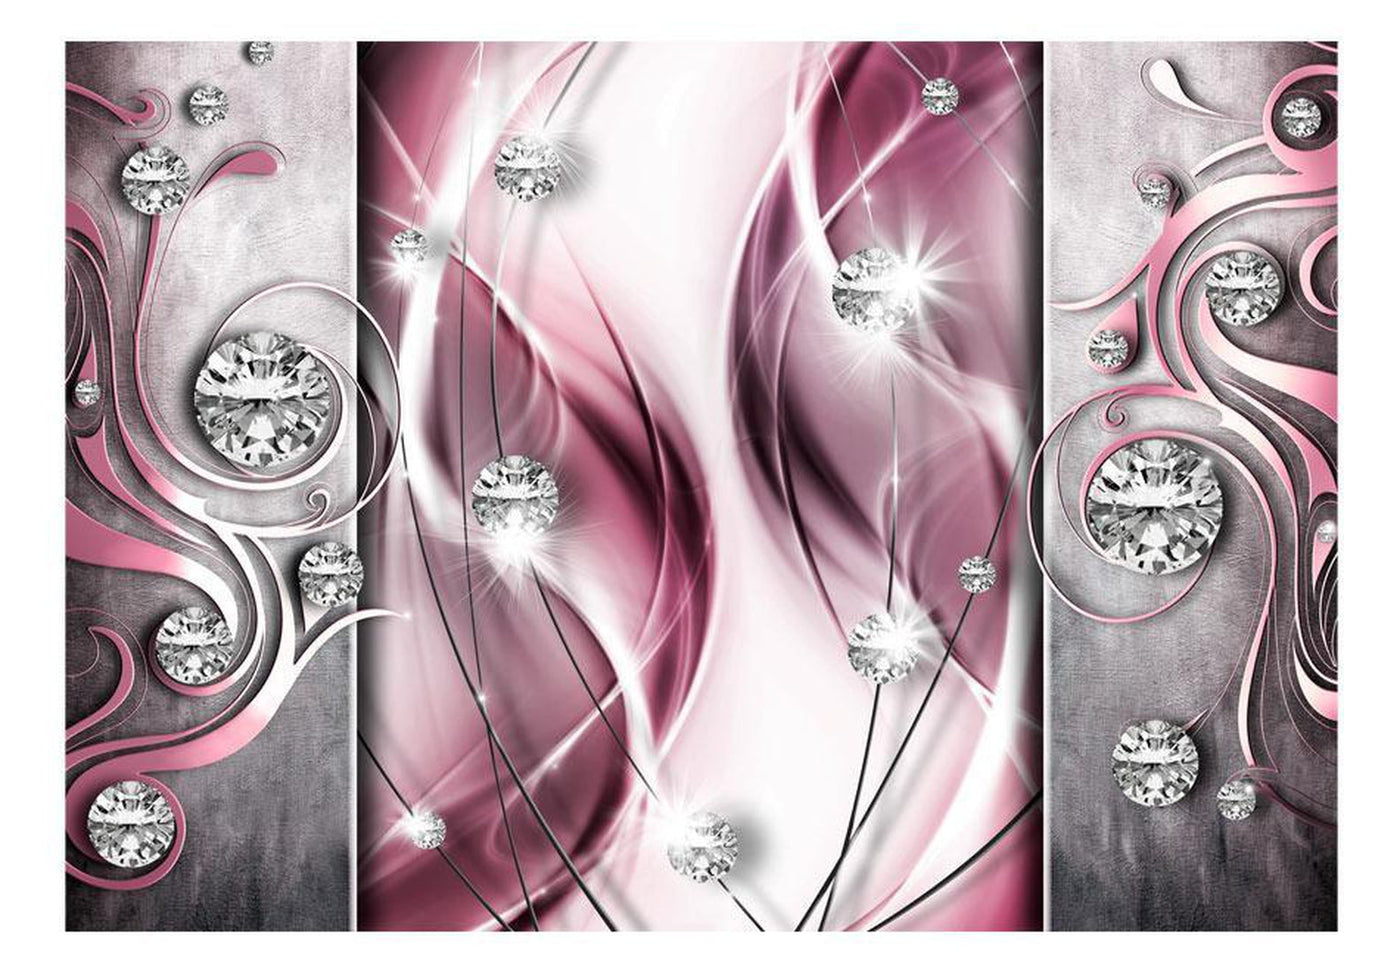 Peel and stick wall mural - Pink and Diamonds-TipTopHomeDecor